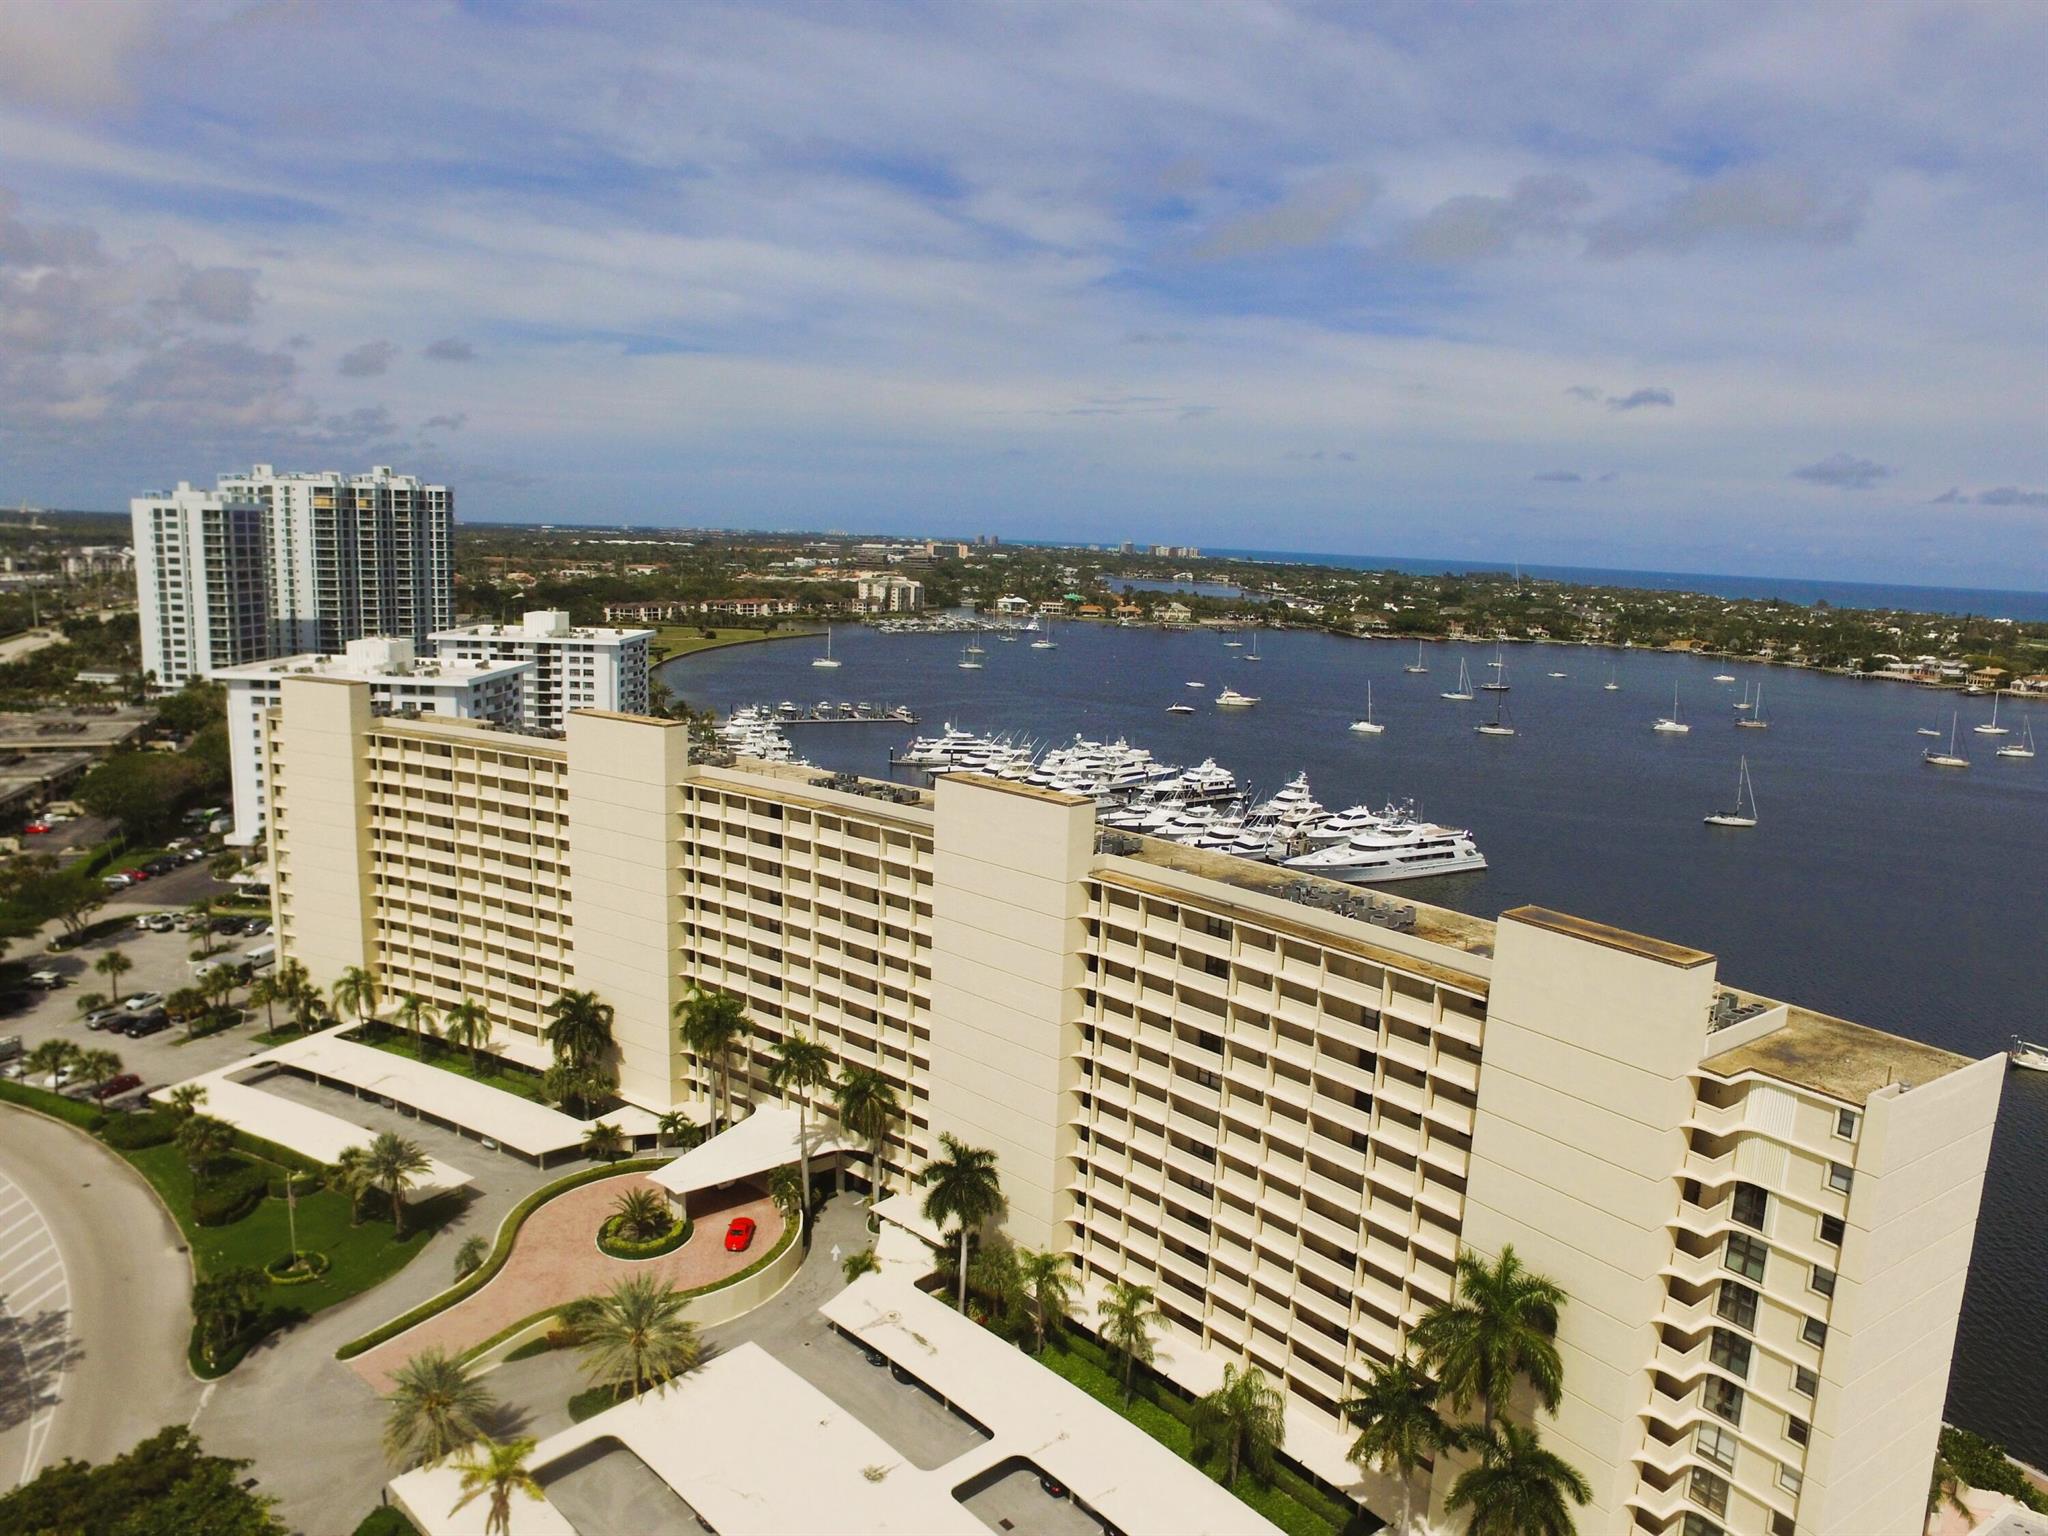 WOW - Rare 3/2.5 with awesome views, Tile Floors throughout all living areas & bedrooms, Each Bedroom has a stunning view of the Intracoastal Waterway, Mega Yachts & the Ocean beyond. The location of this condo convenient to everything in the Palm Beaches (golf & tennis, beaches, airport & more). A private marina available for residents to use, shopping just across the street. Belle's Bar and Grill, a members-only restaurant located on site, Nice Pool, fitness area, 2 mile walking path & more..